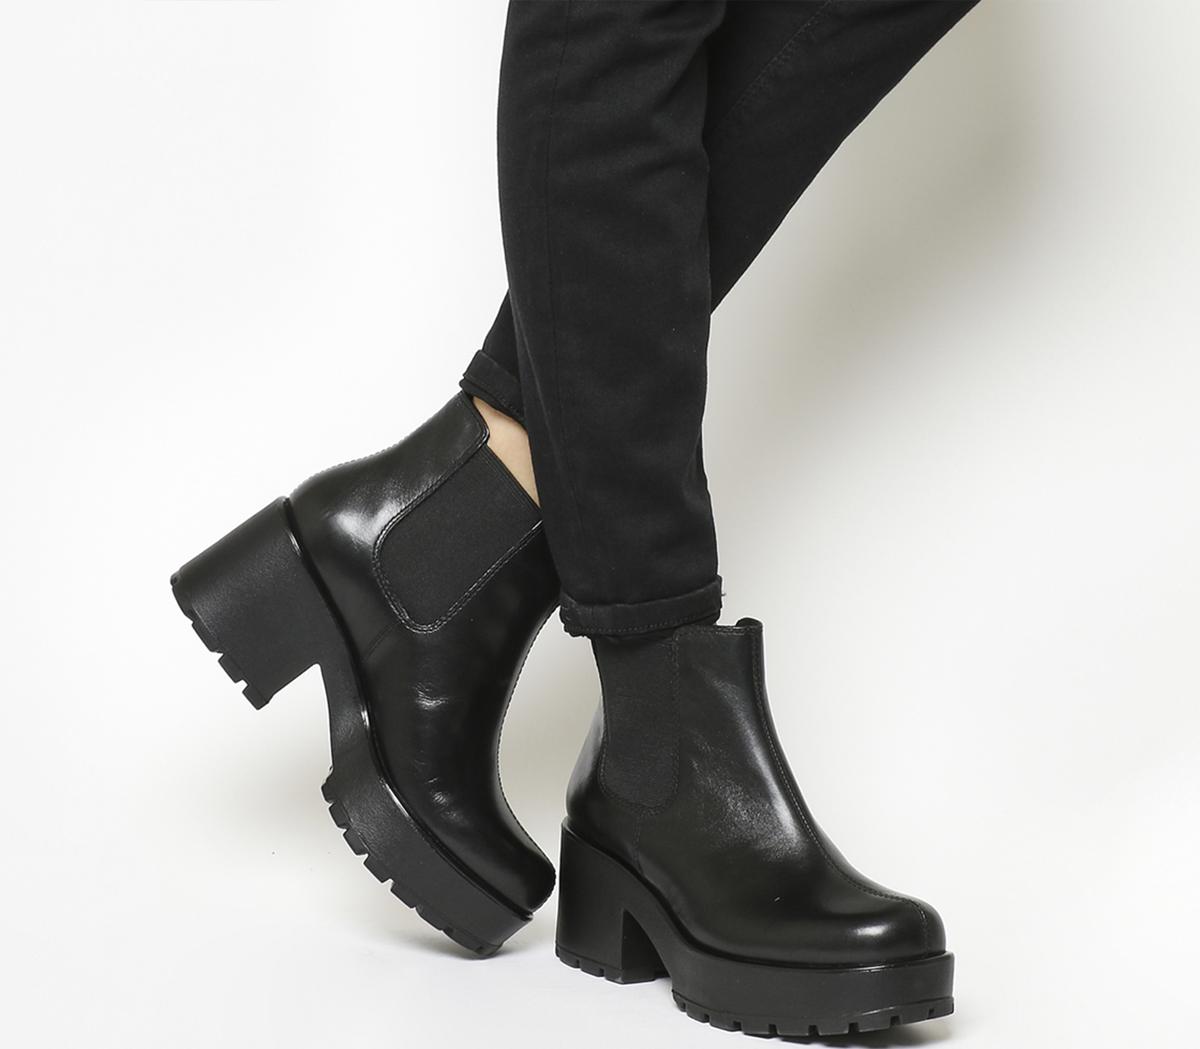 Vagabond Dioon Elastic Chelsea boots Exclusive Black Leather - Ankle Boots